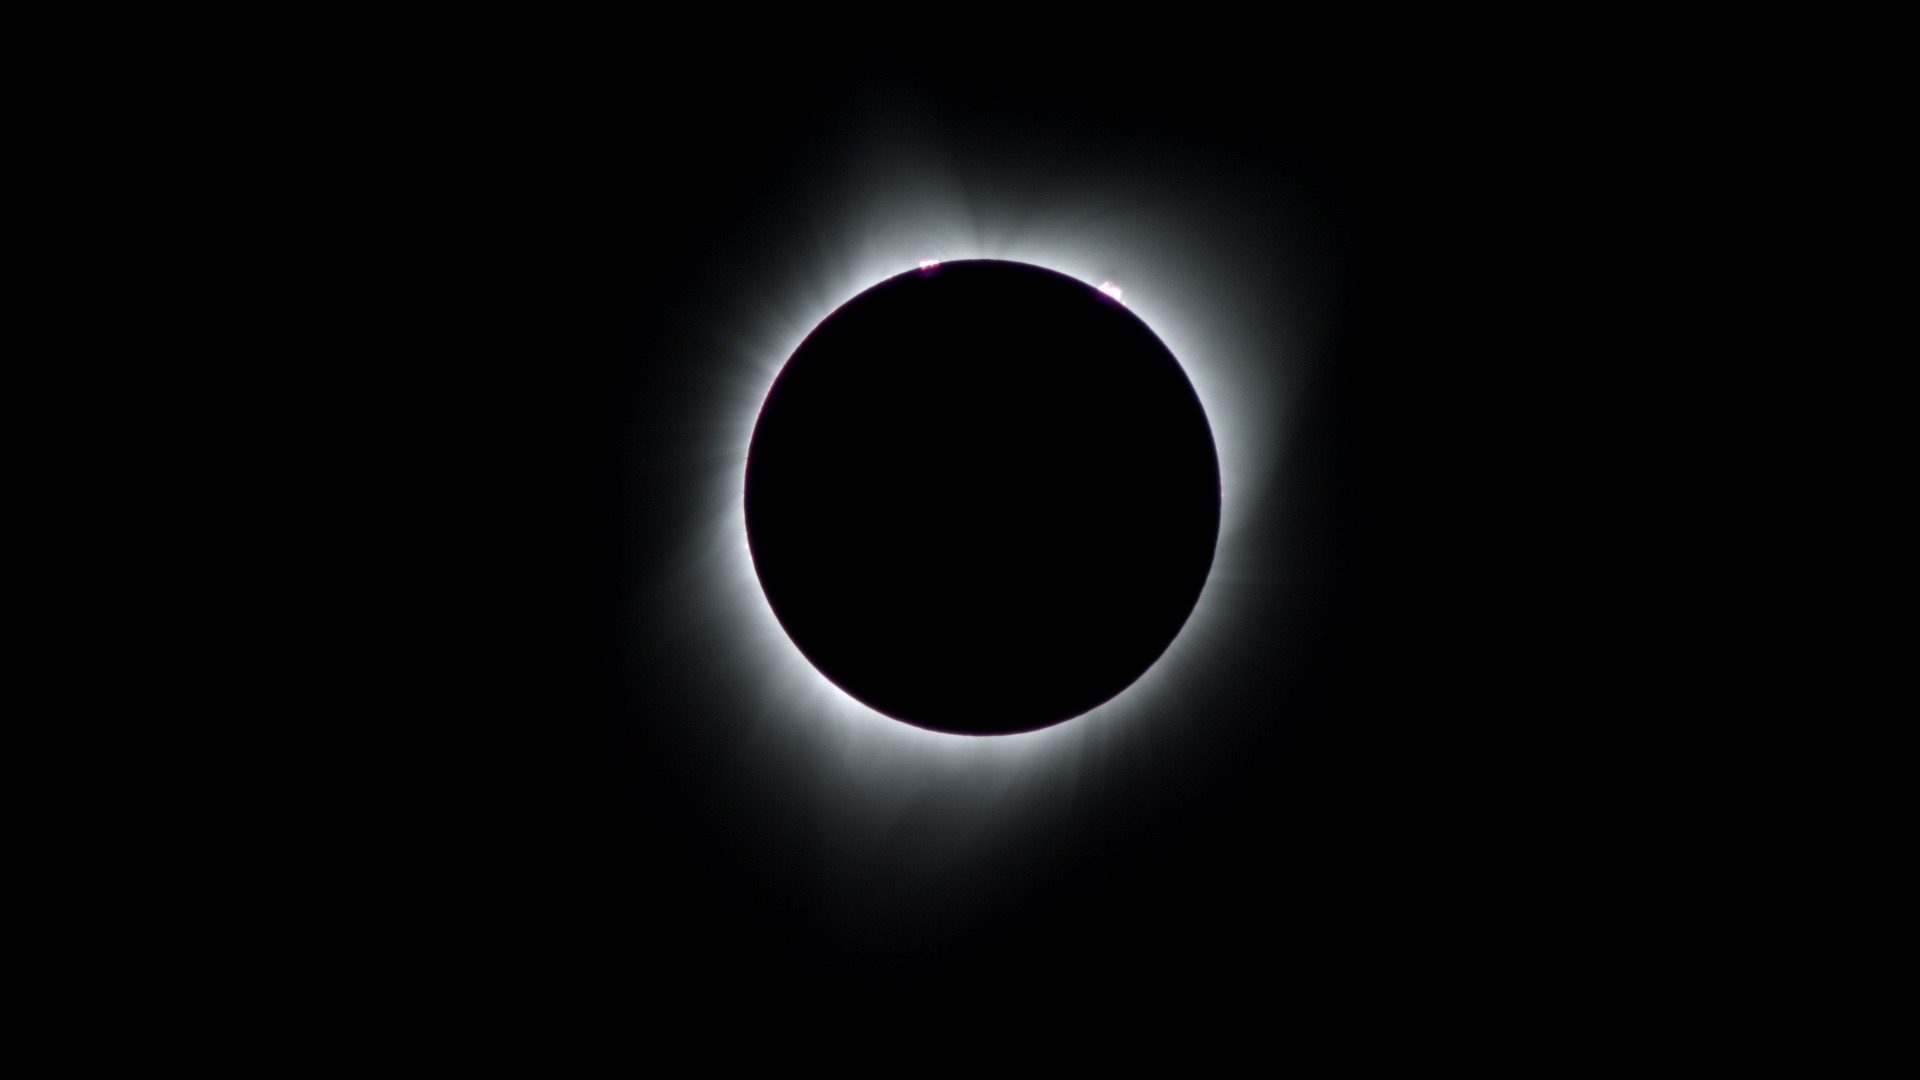 totality_(c)2017_peter_j_decrescenzo_all_rights_reserved.jpg